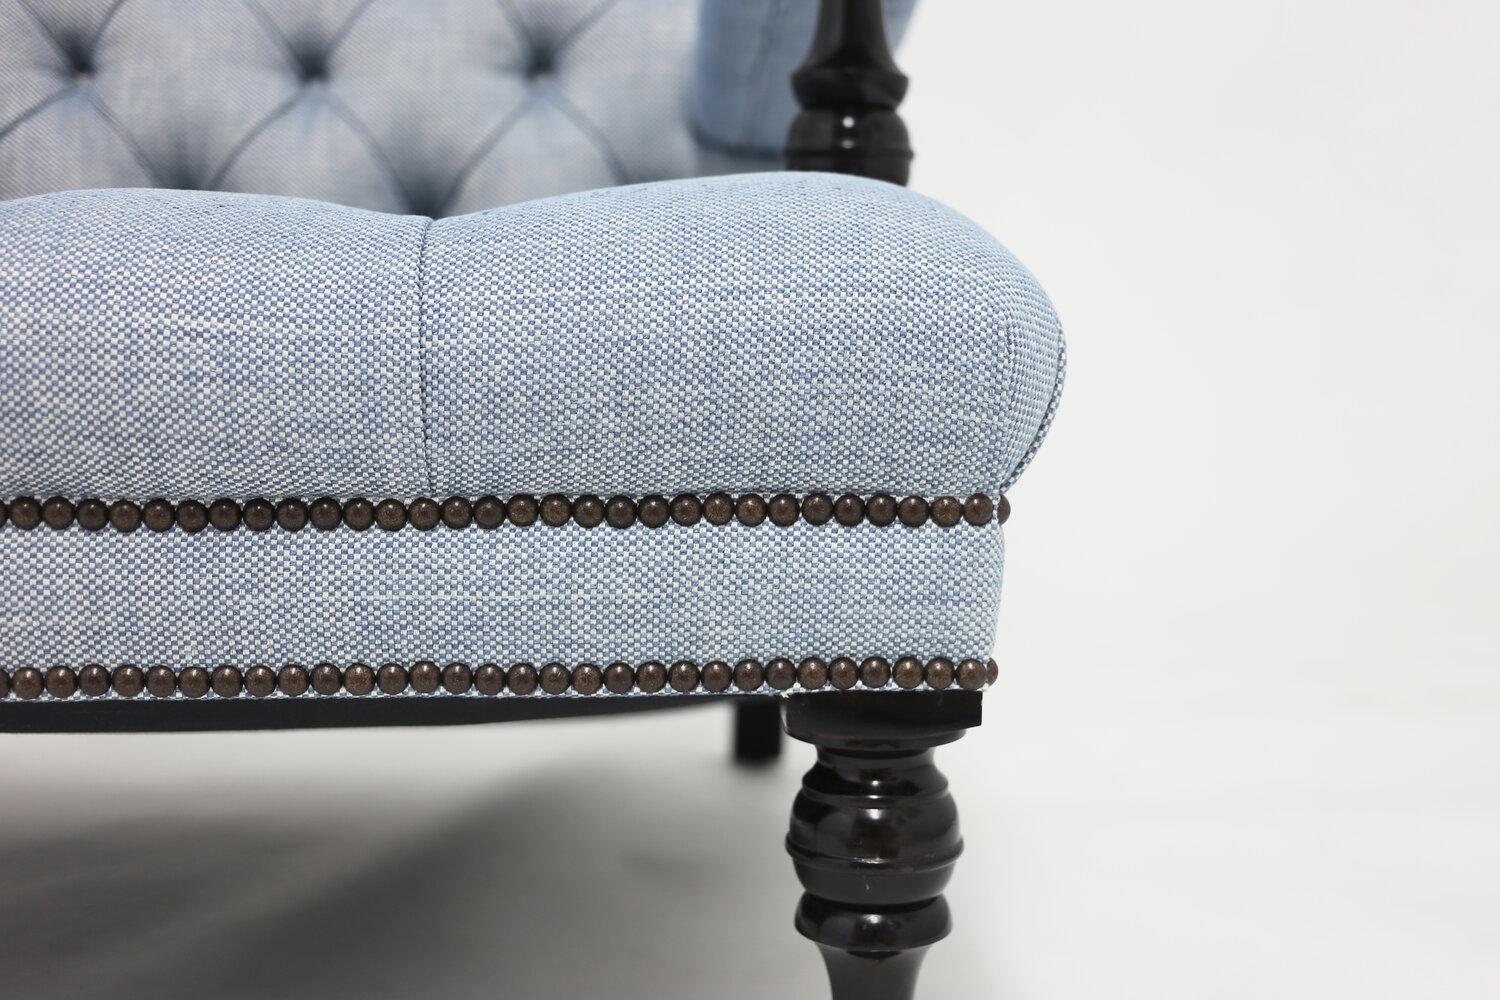 The Lewis club chair shown in blue linen fabric with tufted back and self covered buttons. All hair filled and stitched upholstery with hand carved dark mahogany wood legs and arm stretchers with special nailhead trim detail.
THIS ITEM IS NLY